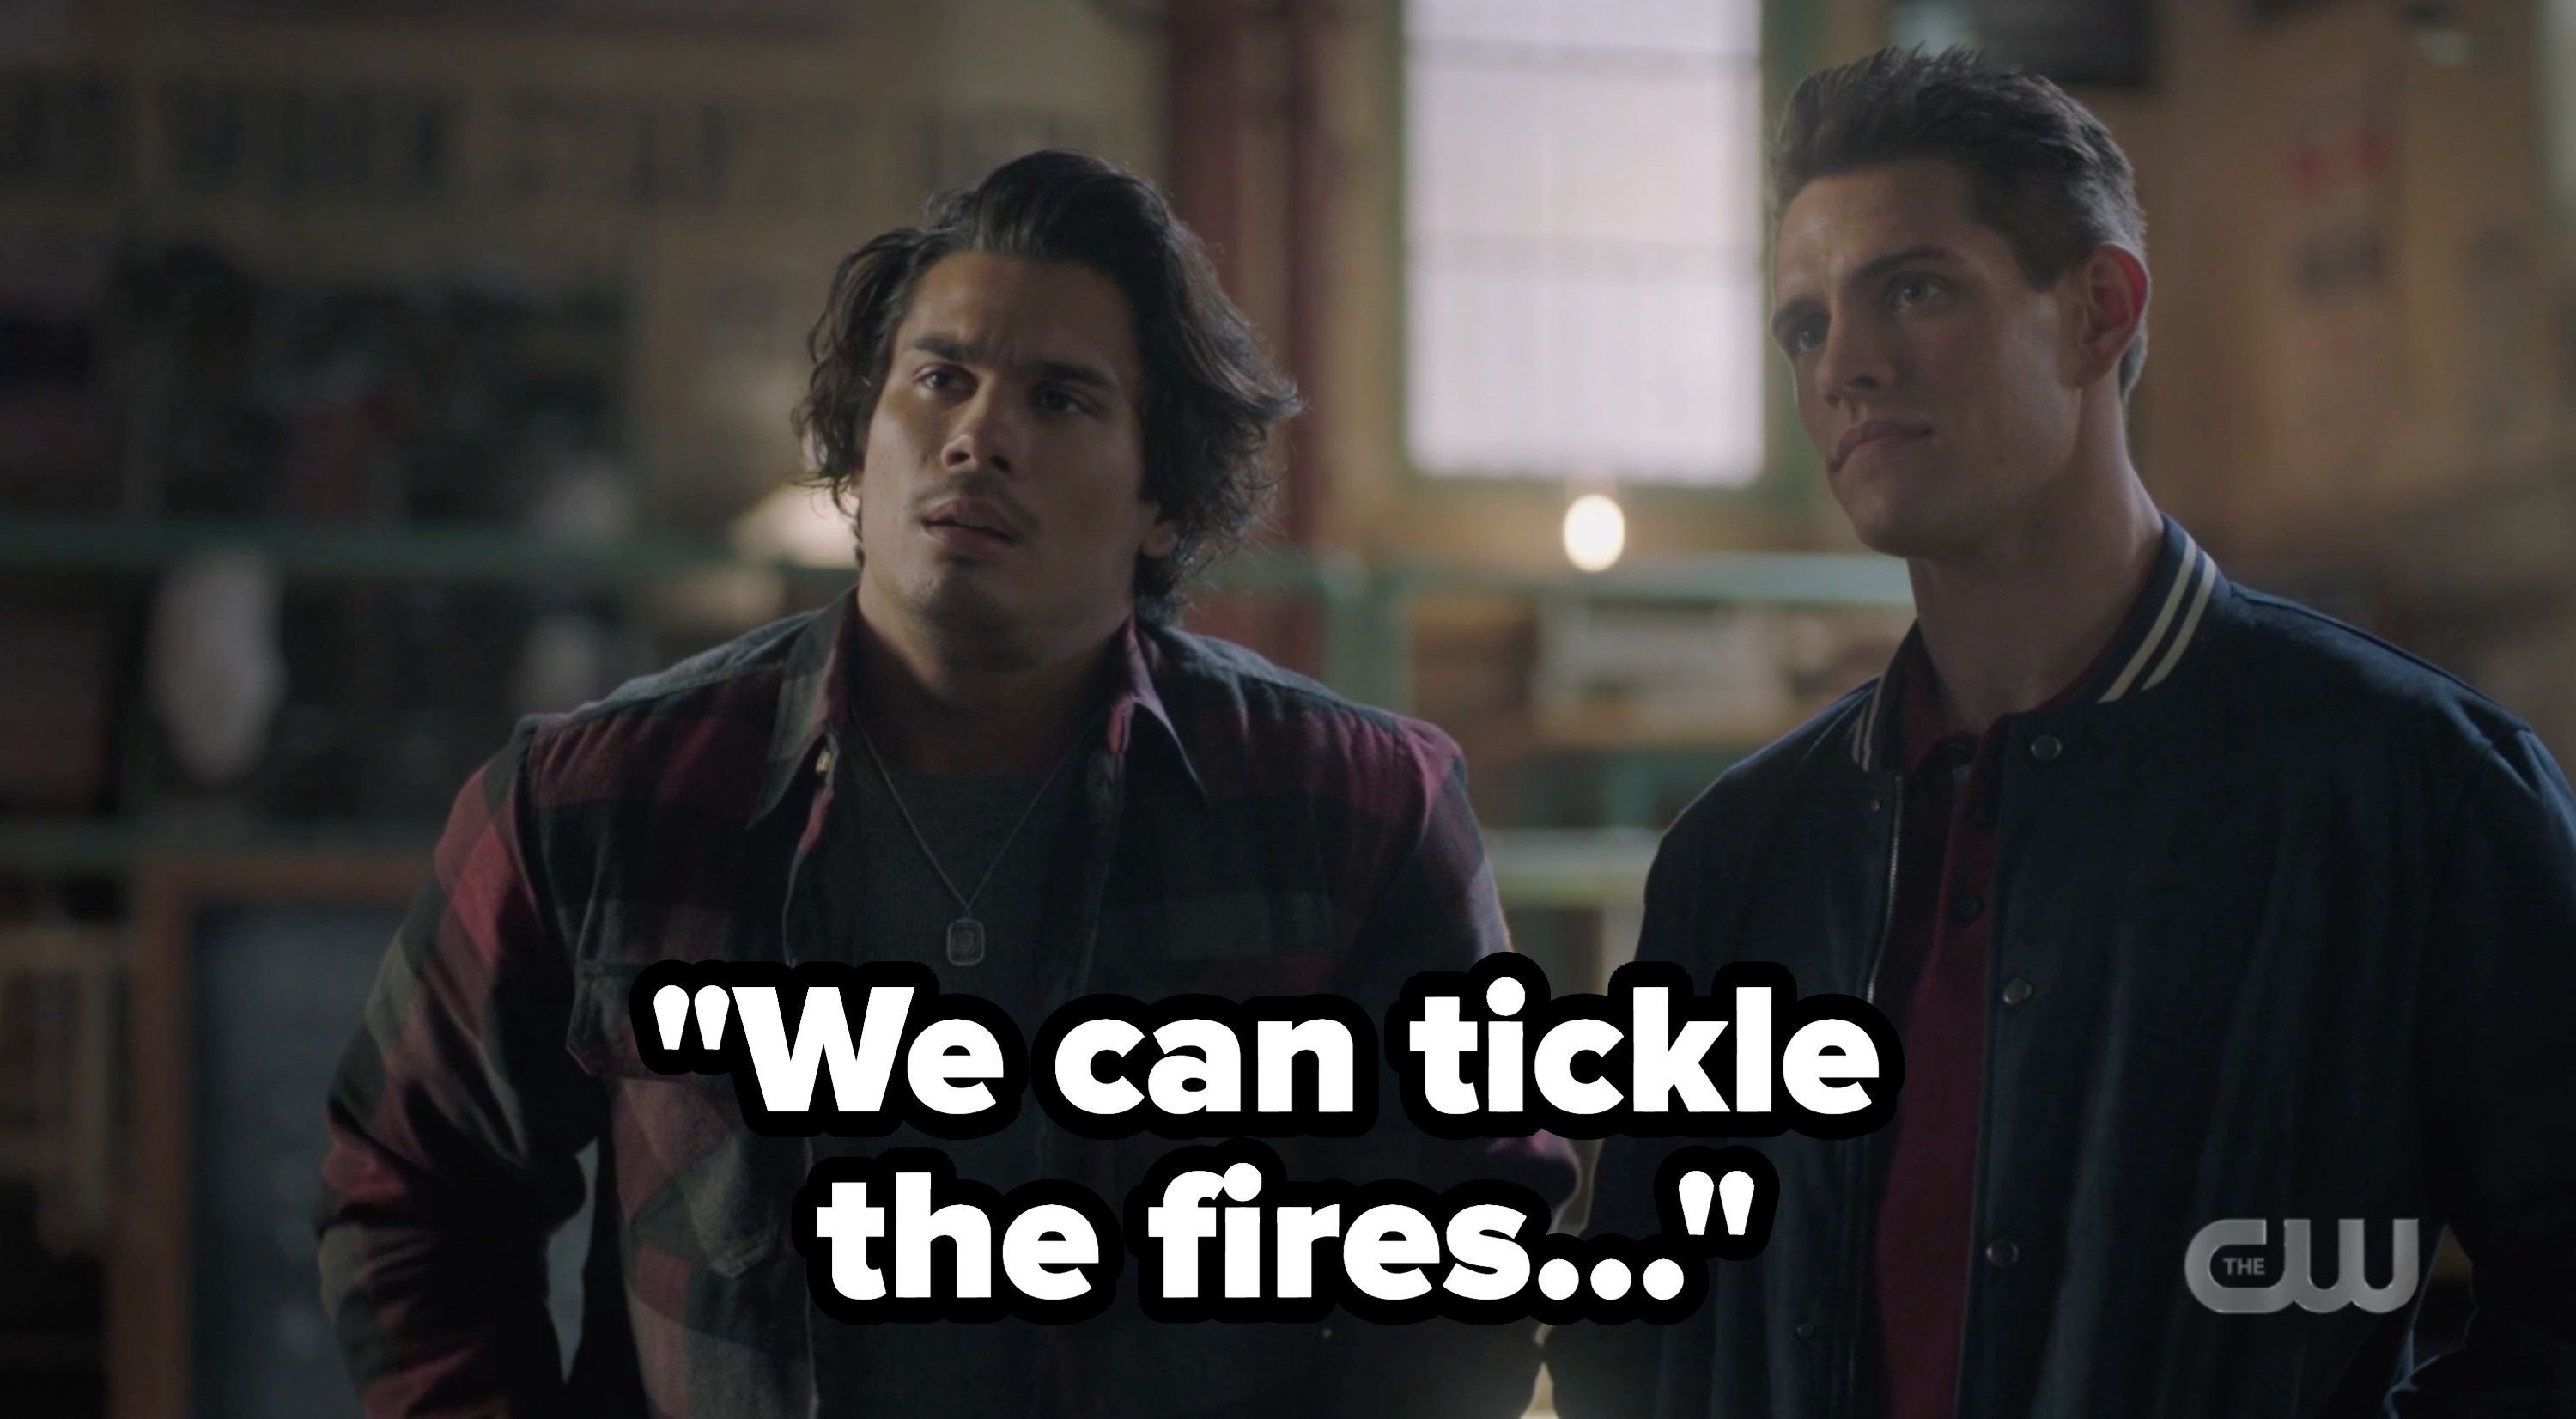 Kevin and Fangs with &quot;we can tickle the fires&quot; as a caption